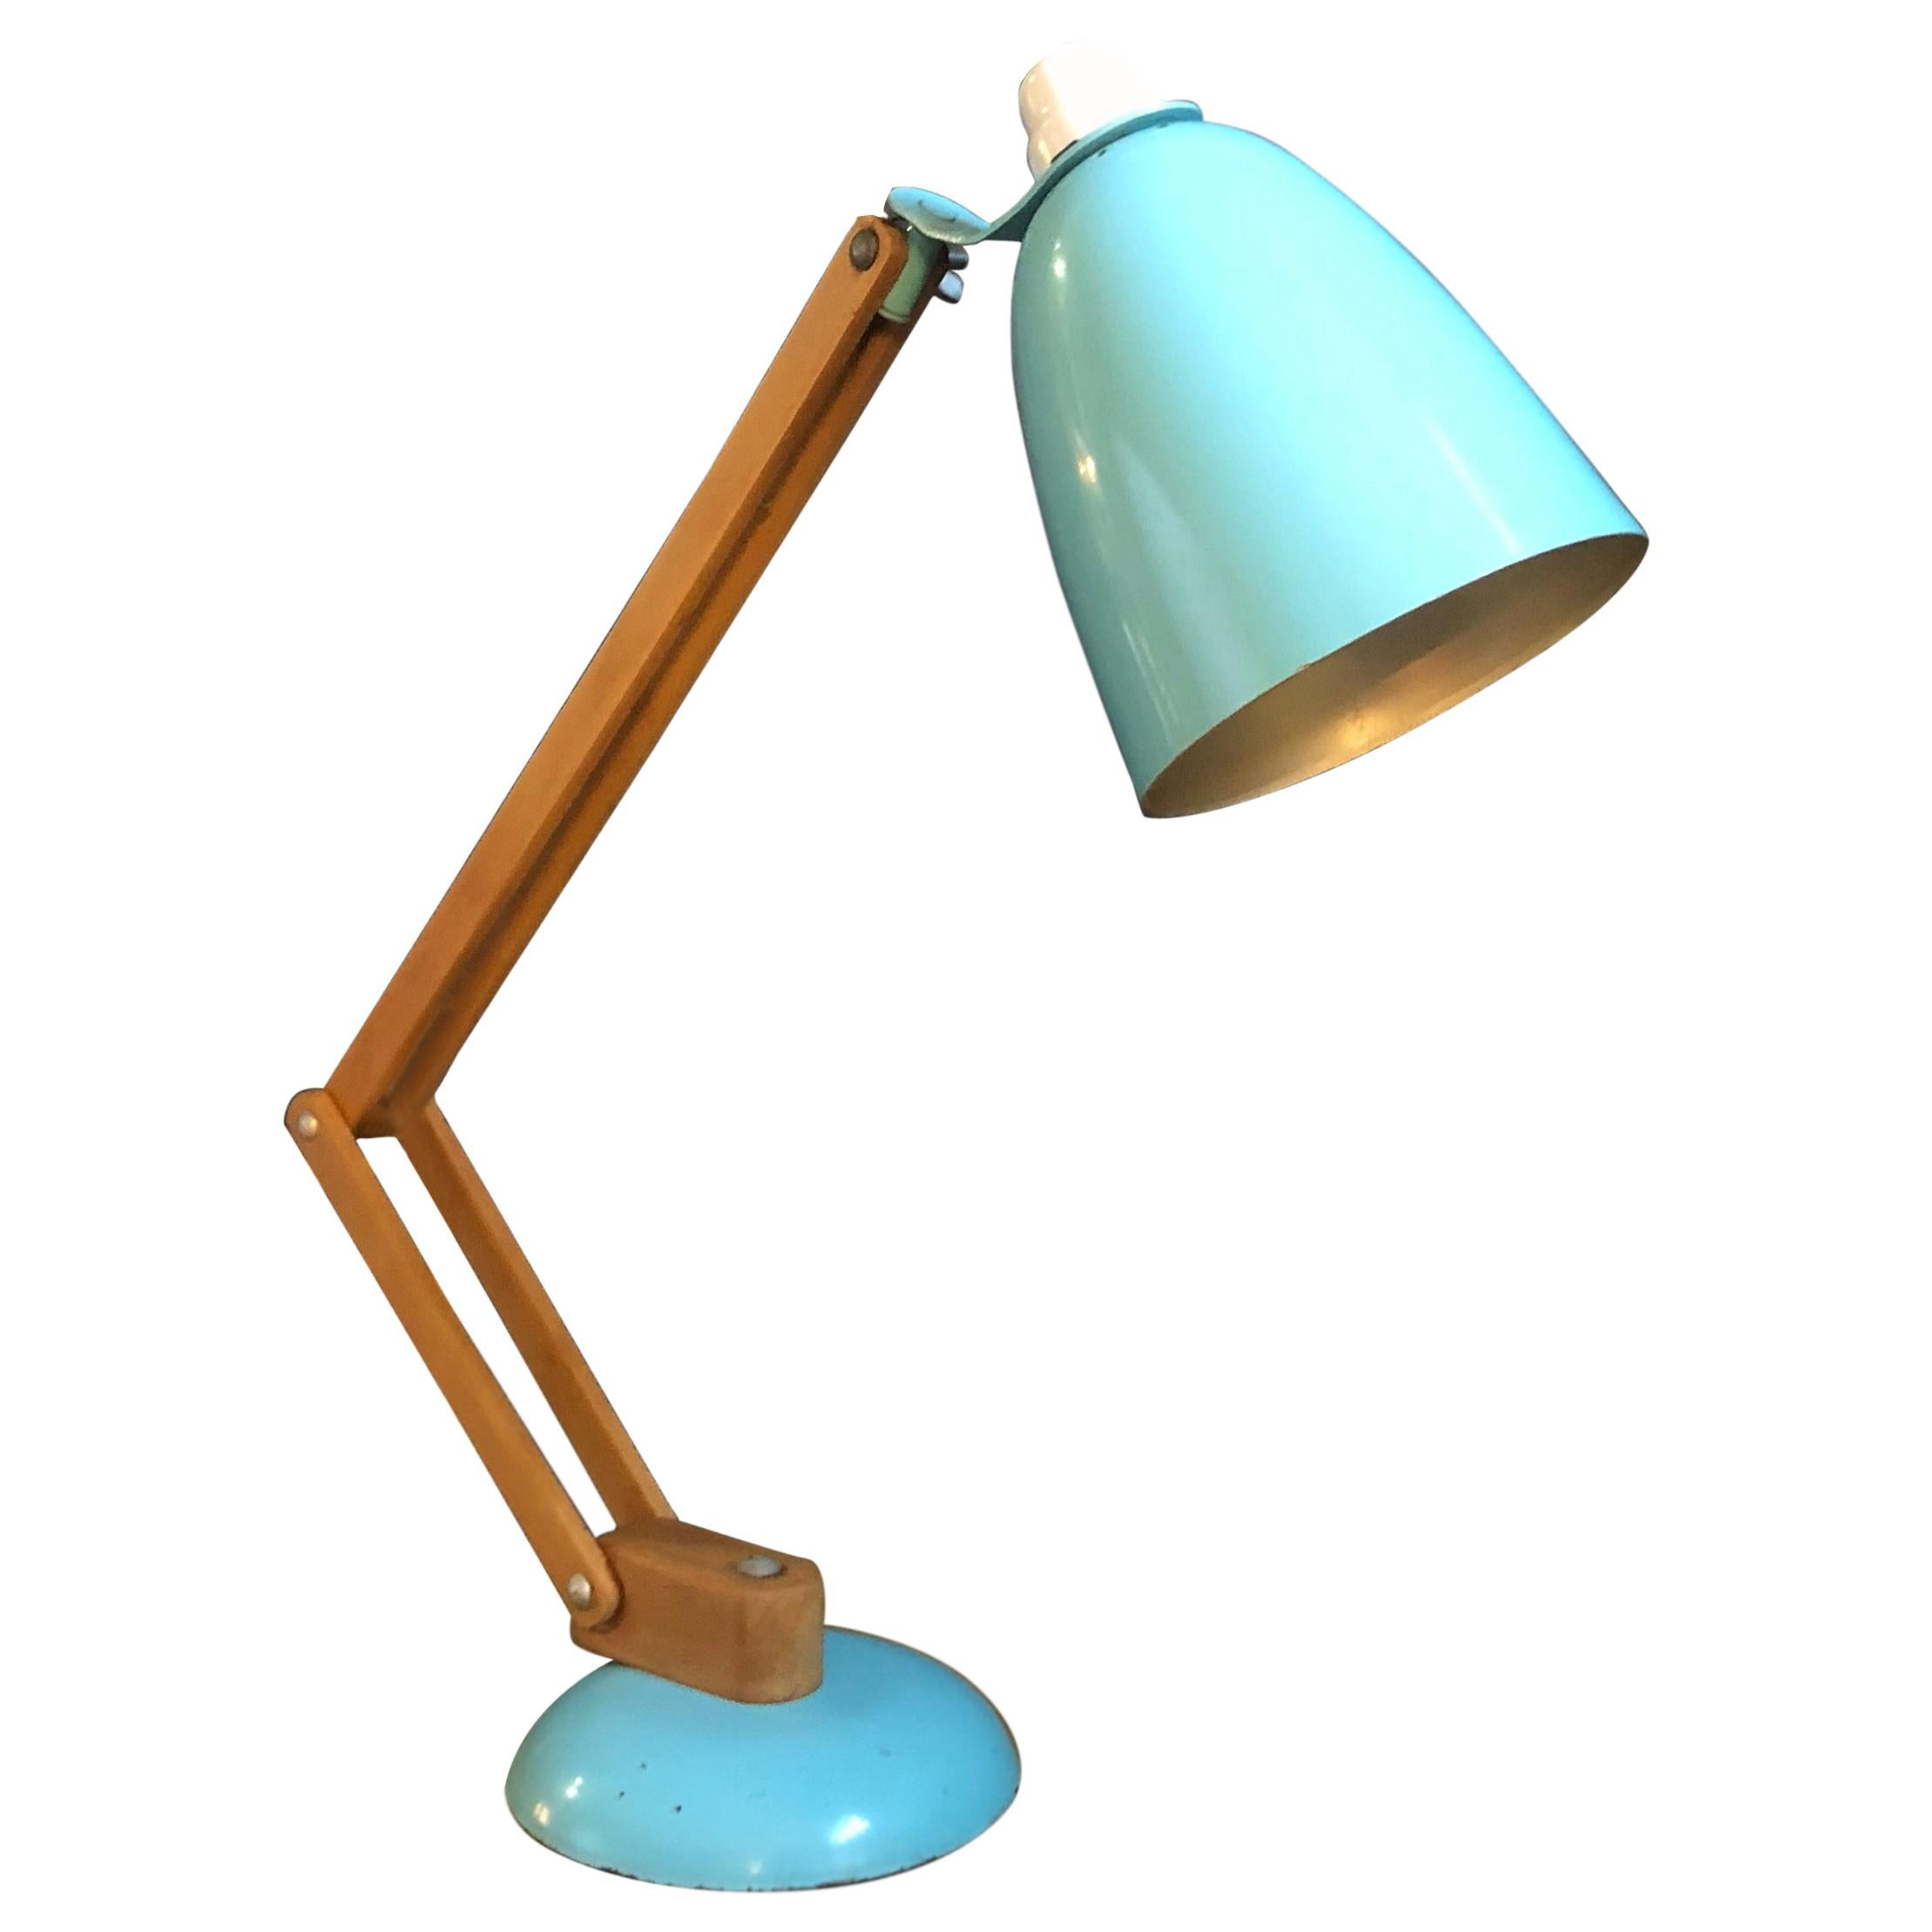 Vintage Midcentury Maclamp by Terence Conran Desk Lamp in Turquoise